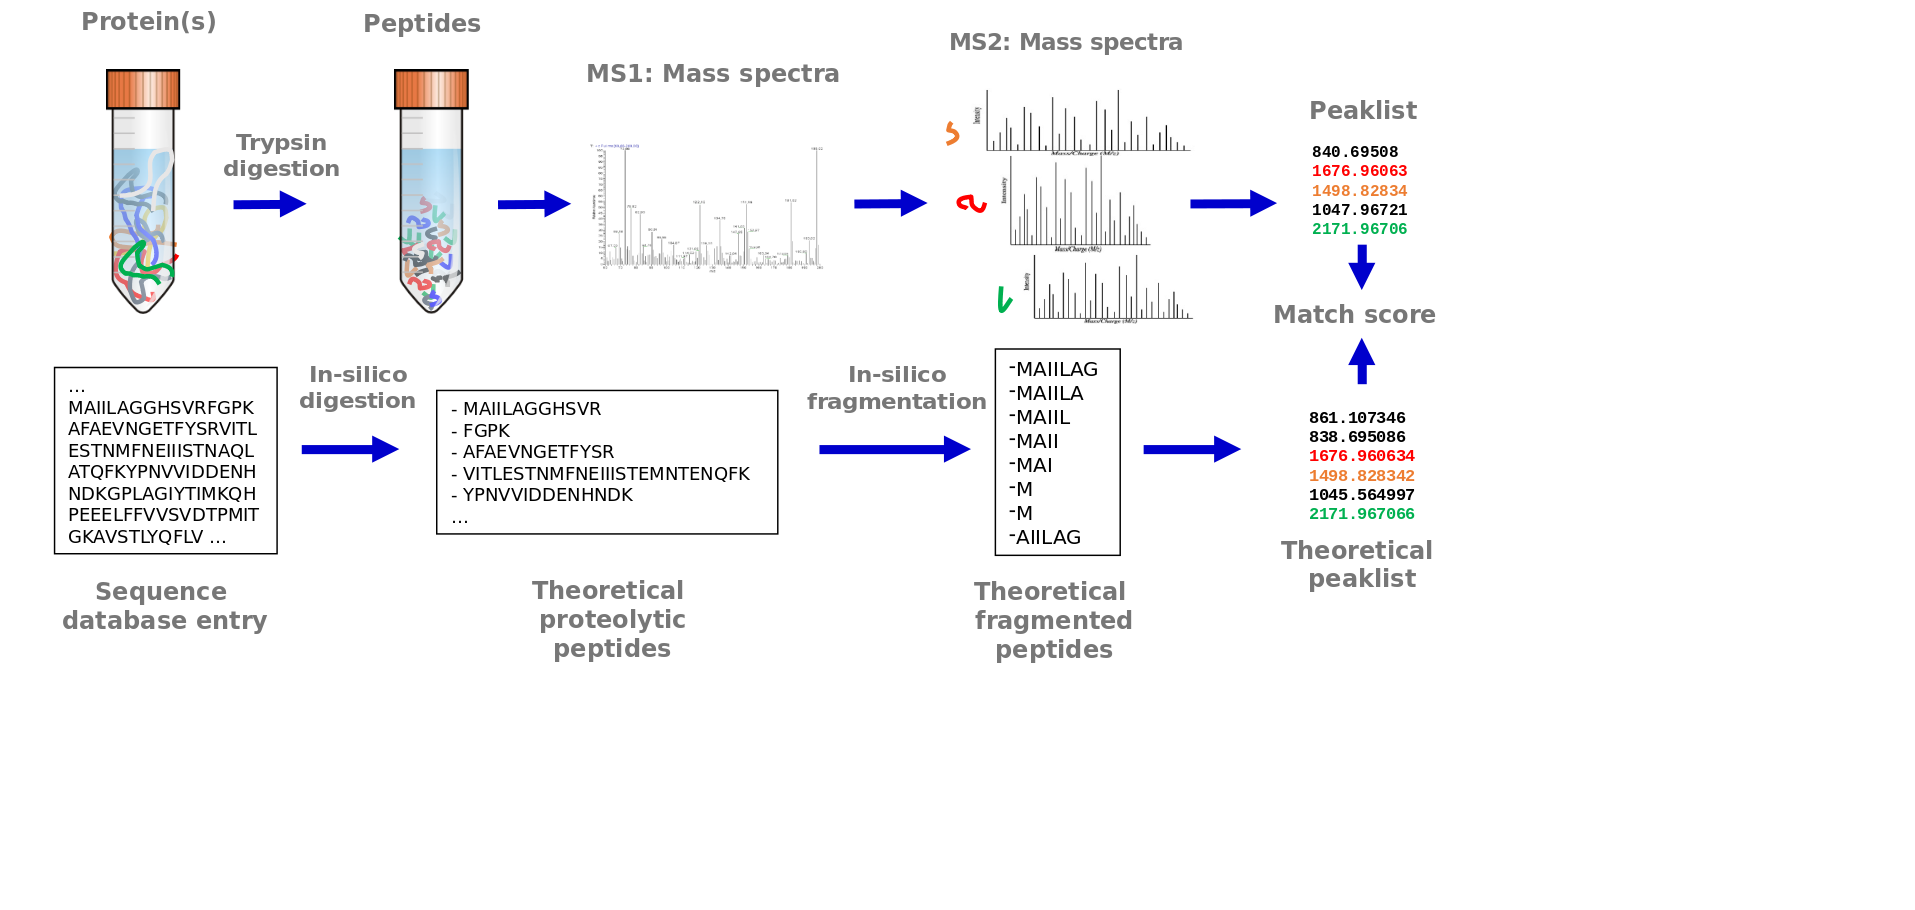 Flowchart again, proteins go to peptides go to MS1 to MS2 to a Peak List. Below a sequence database entry goes through in-silico digestion and theoretical fragmentation, producing a theoretical peaklist which is matched against the previous peaklist.